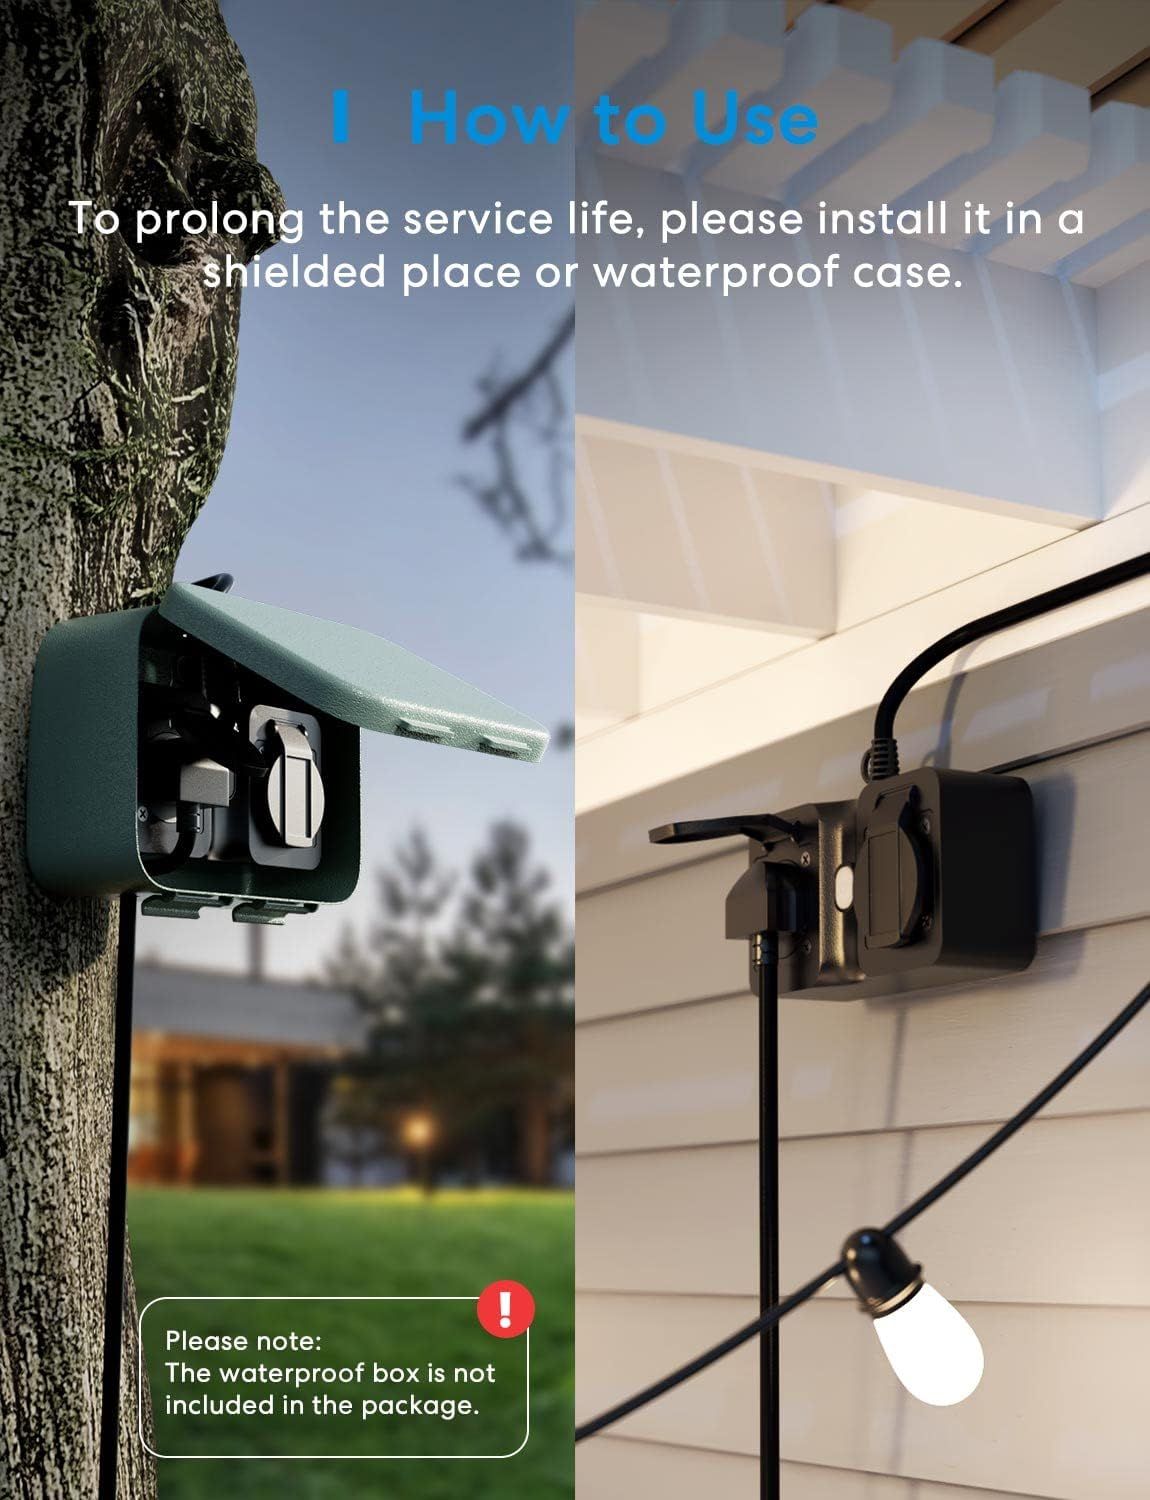 Meross Outdoor Smart Plug Compatible with Apple HomeKit, Siri, Alexa, Google Assistant and SmartThings, Waterproof WiFi Outdoor Outlet, Remote & Voice